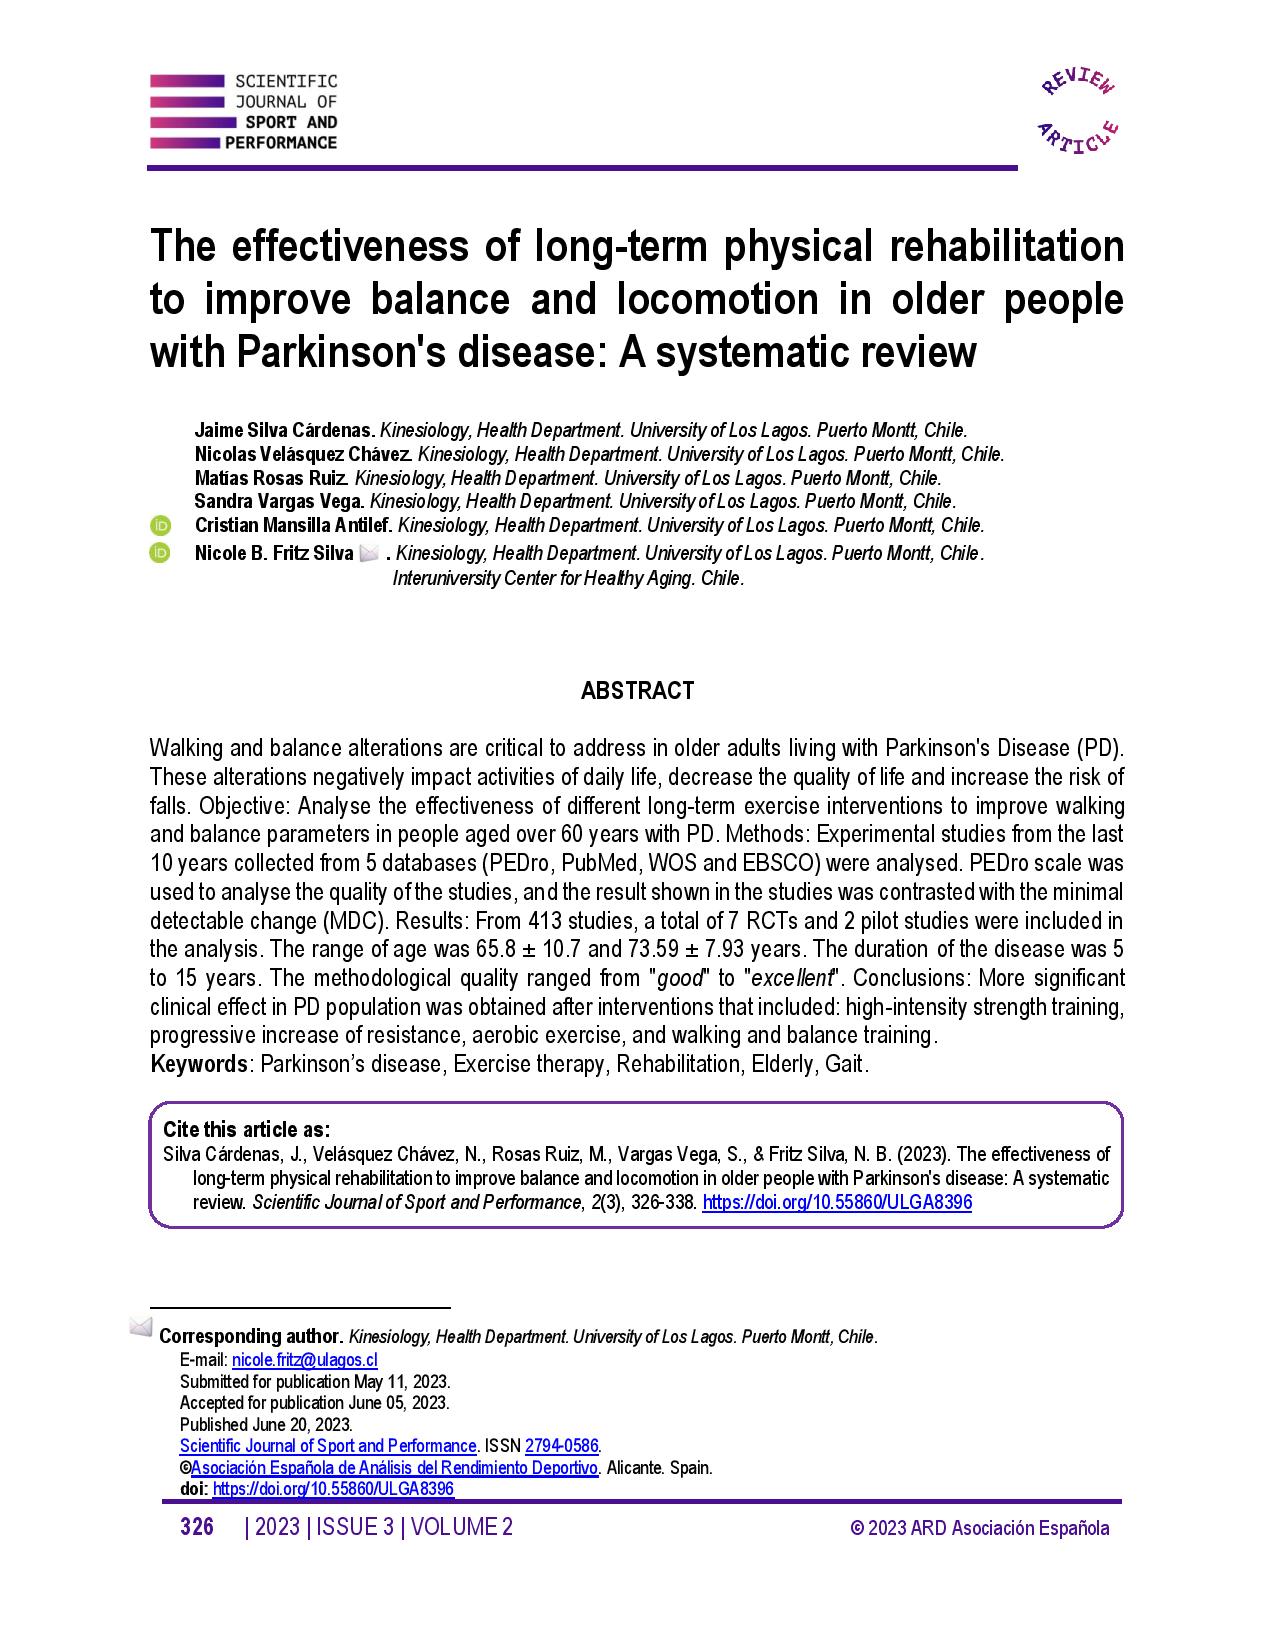 The effectiveness of long-term physical rehabilitation to improve balance and locomotion in older people with Parkinson's disease: A systematic review